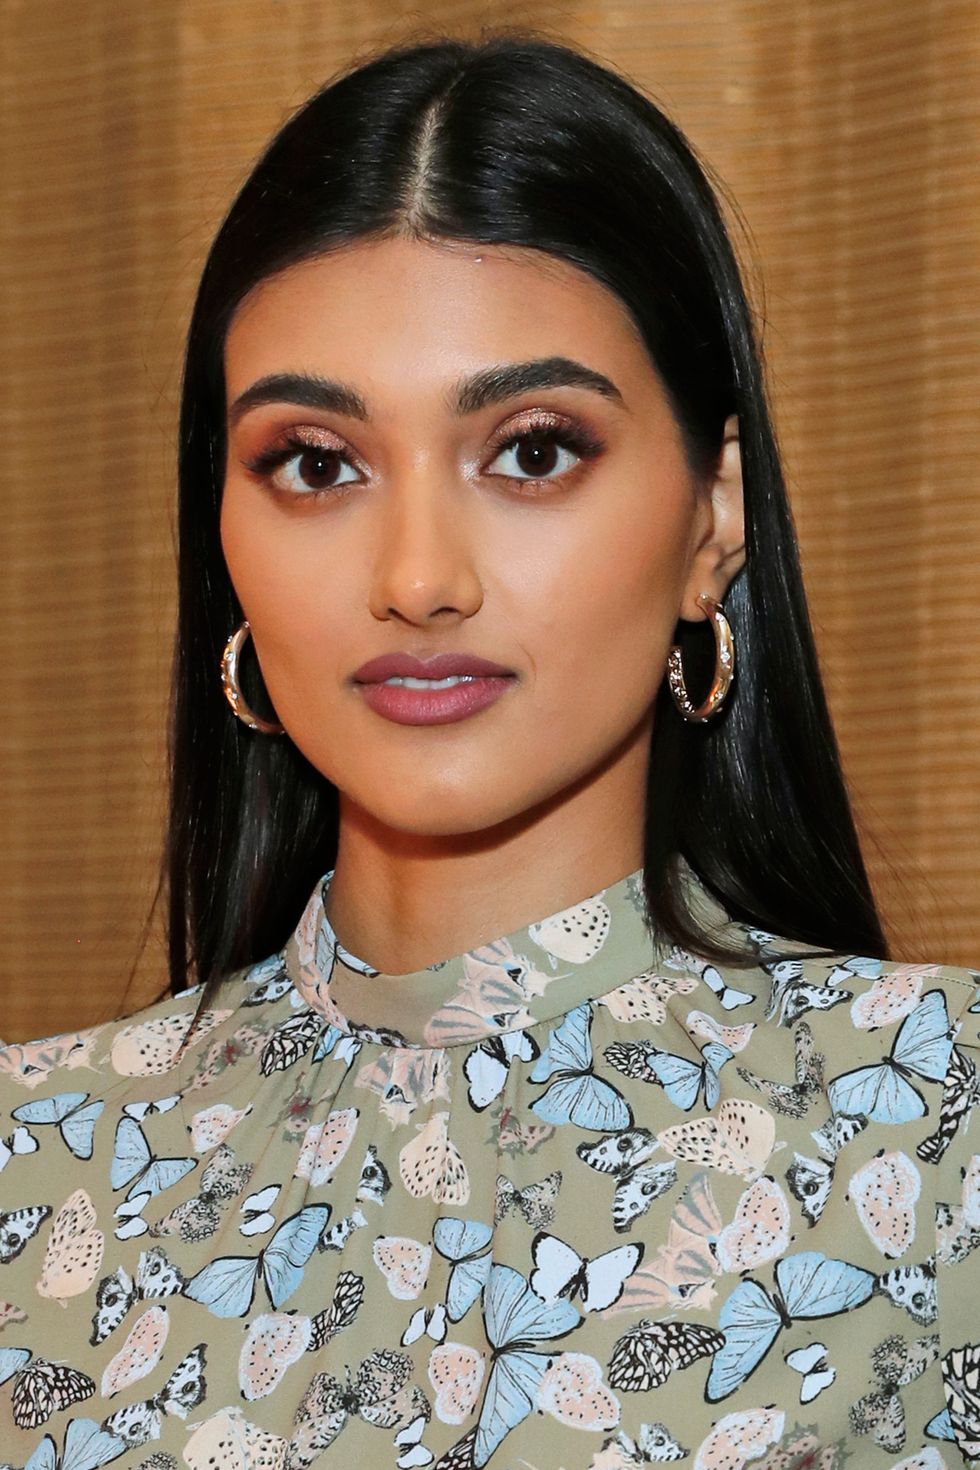 Daily beauty inspiration for 2019 - Best celebrity beauty looks